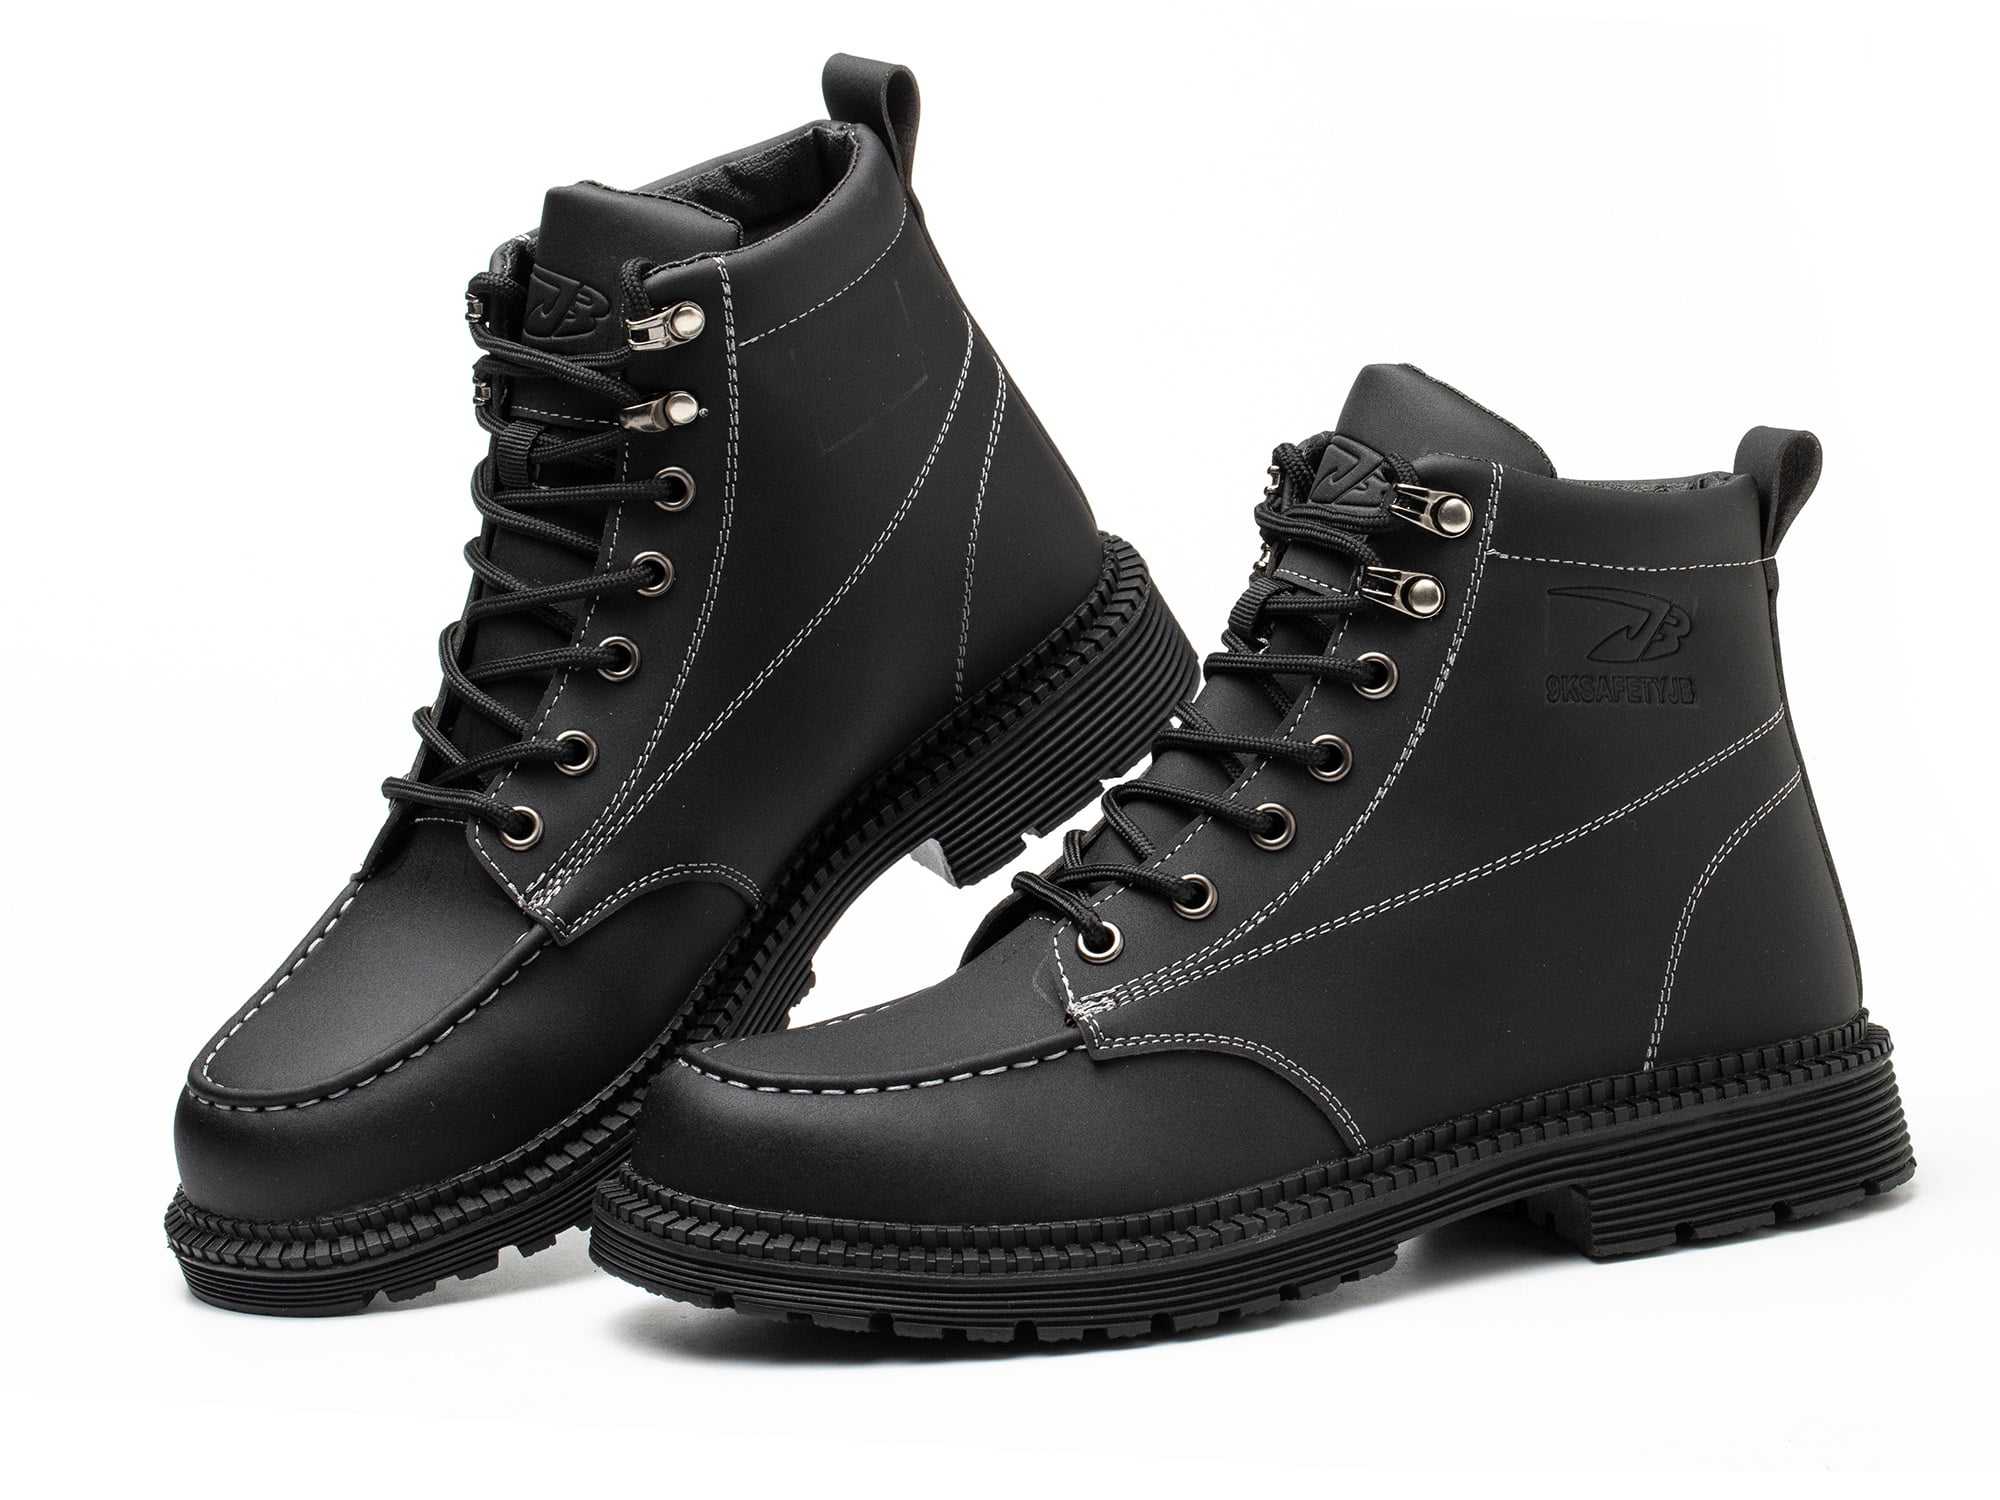 Mens Safety Work Ankle Boots Steel Toe Cap Casual Shoes Trainers Hiking Black 